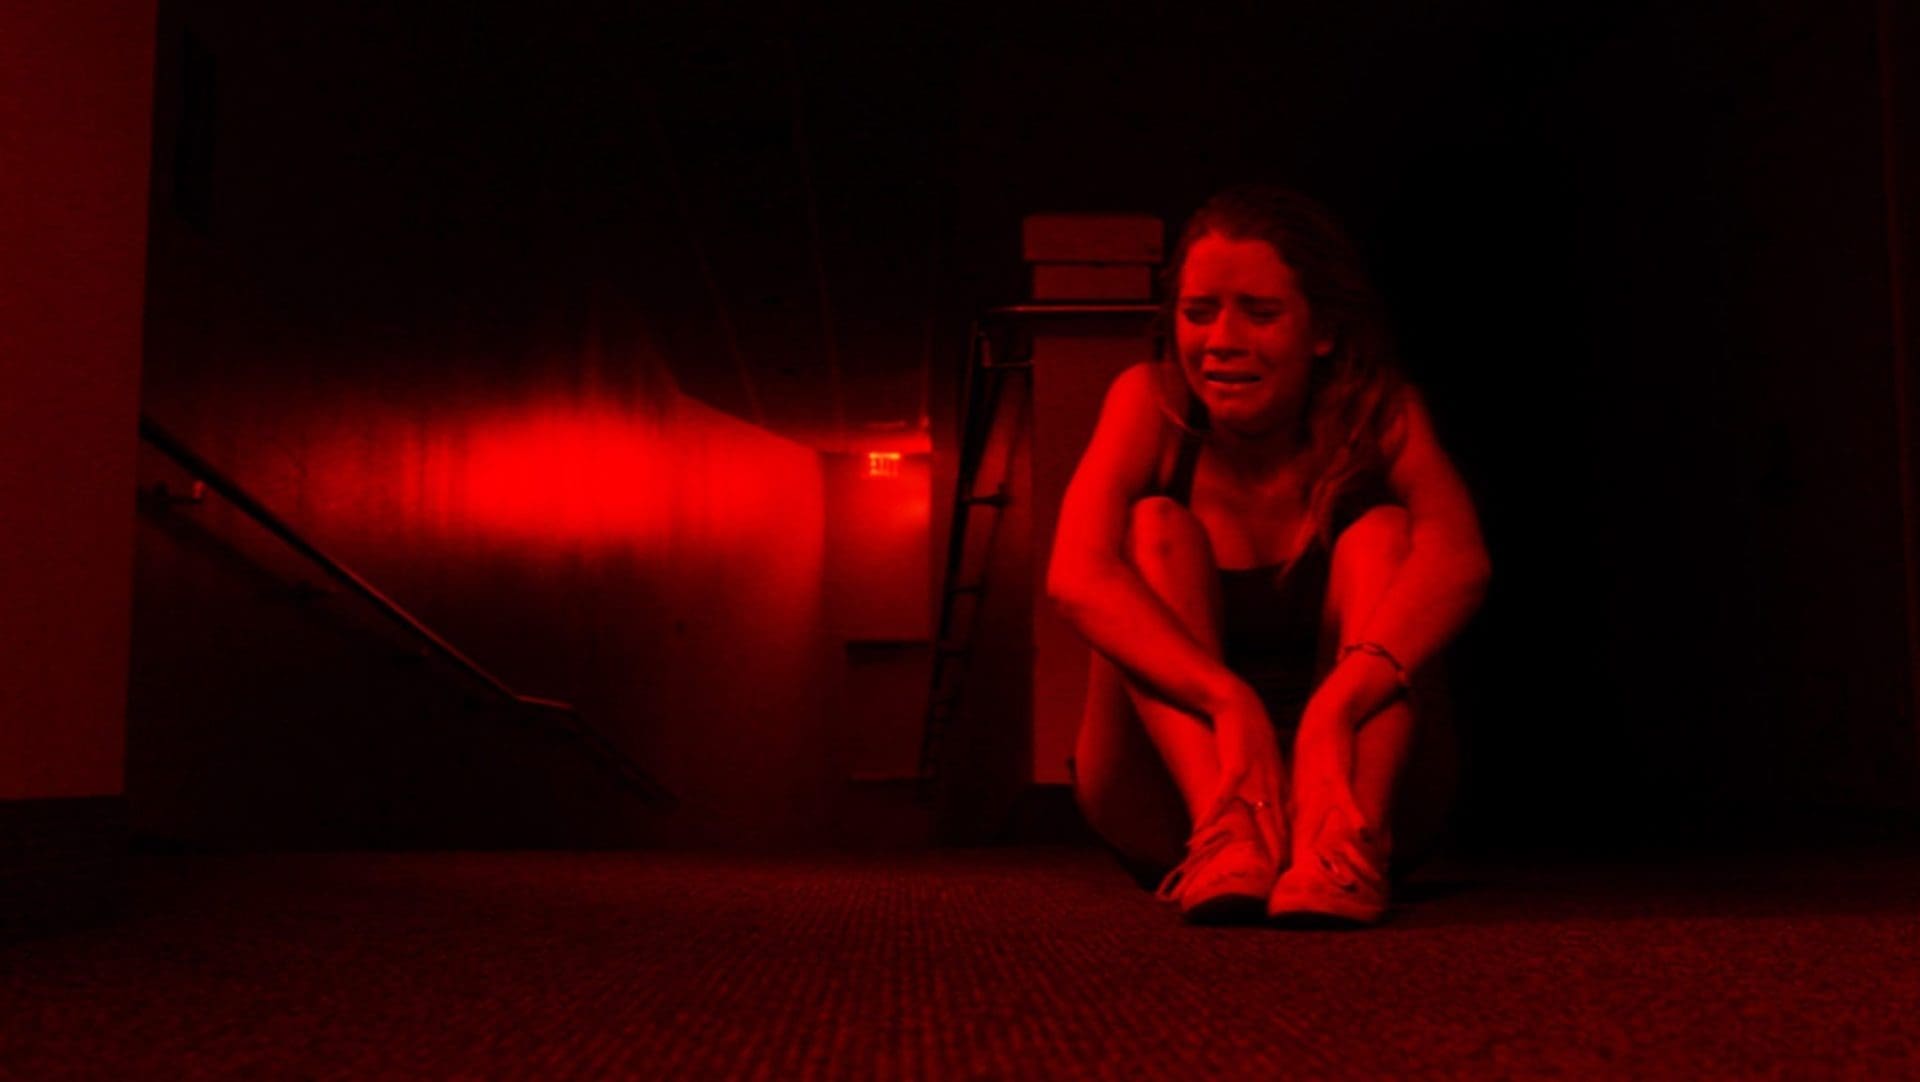 Photo Credit: Courtesy of Warner Bros. Pictures CASSIDY GIFFORD as Cassidy in New Line Cinema's horror film "THE GALLOWS," a Warner Bros. Pictures release.